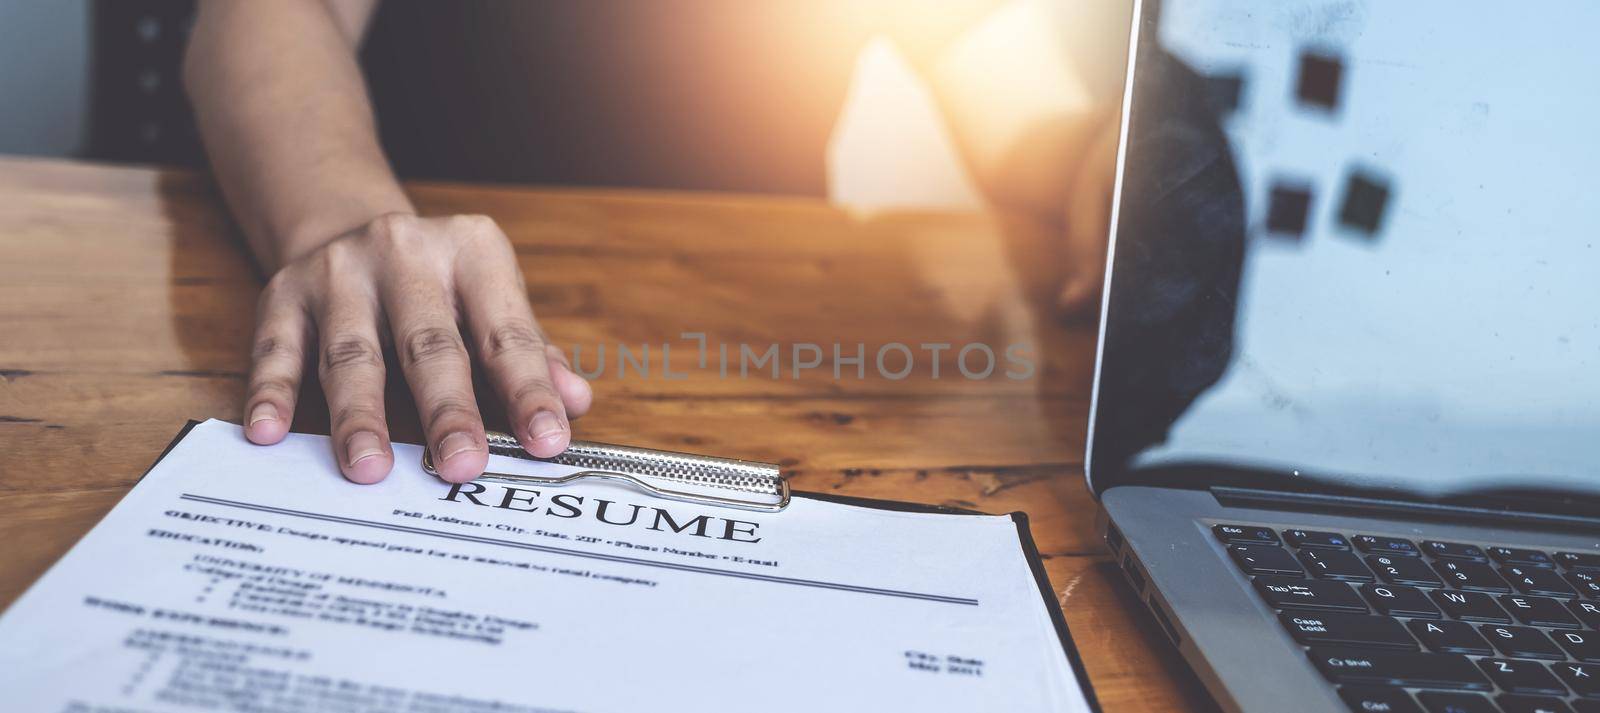 Businesswoman reading resume of man on document during an interview